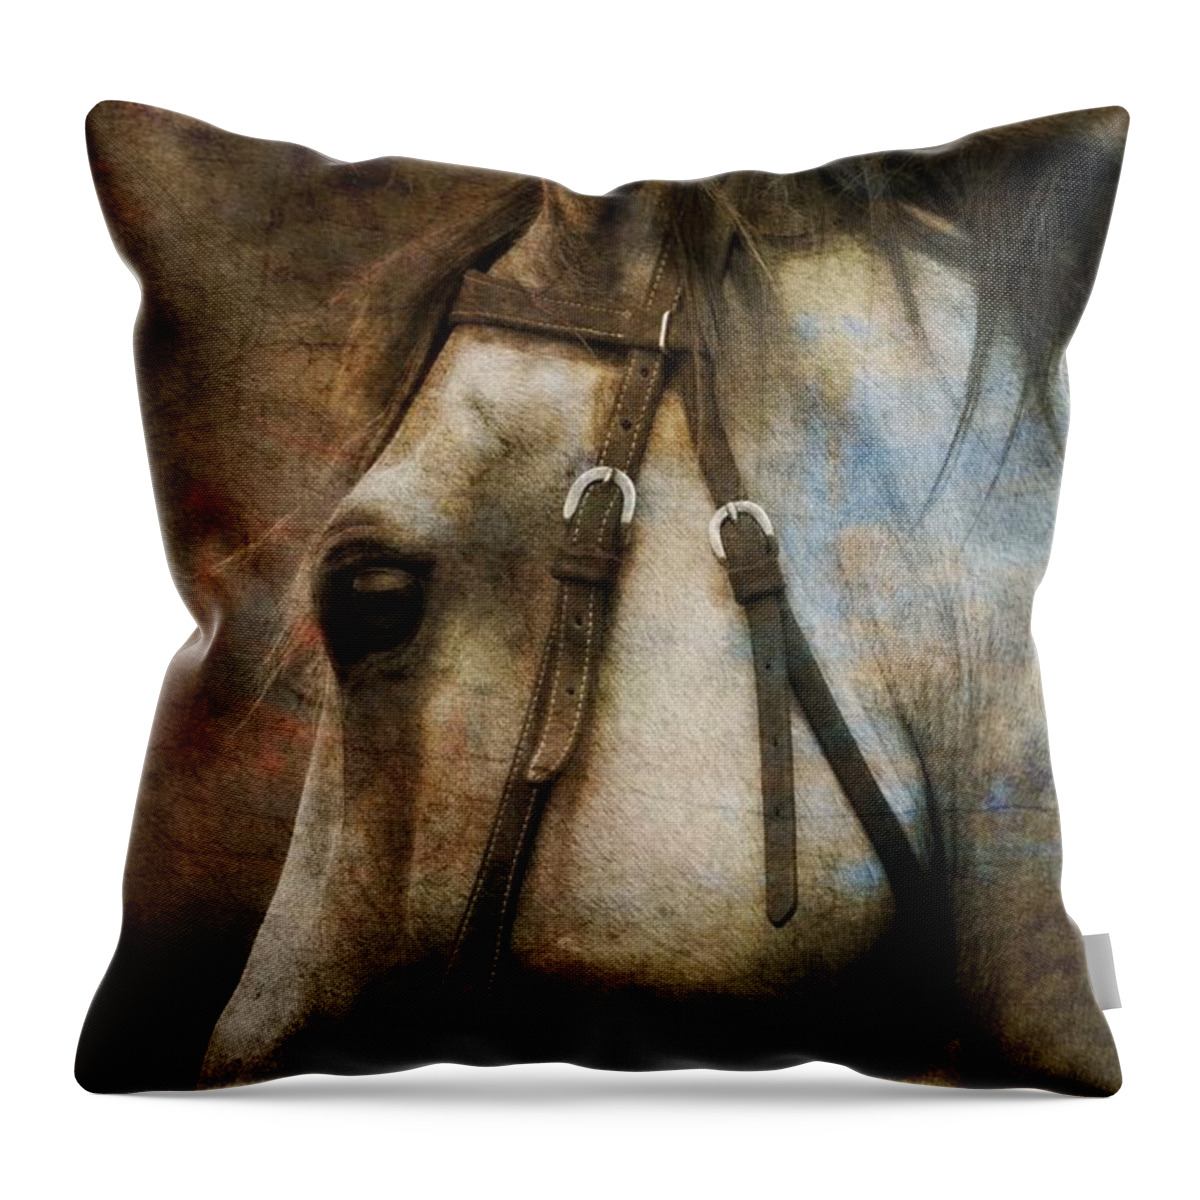 Horse Throw Pillow featuring the digital art Horse With No Name by Paul Lovering